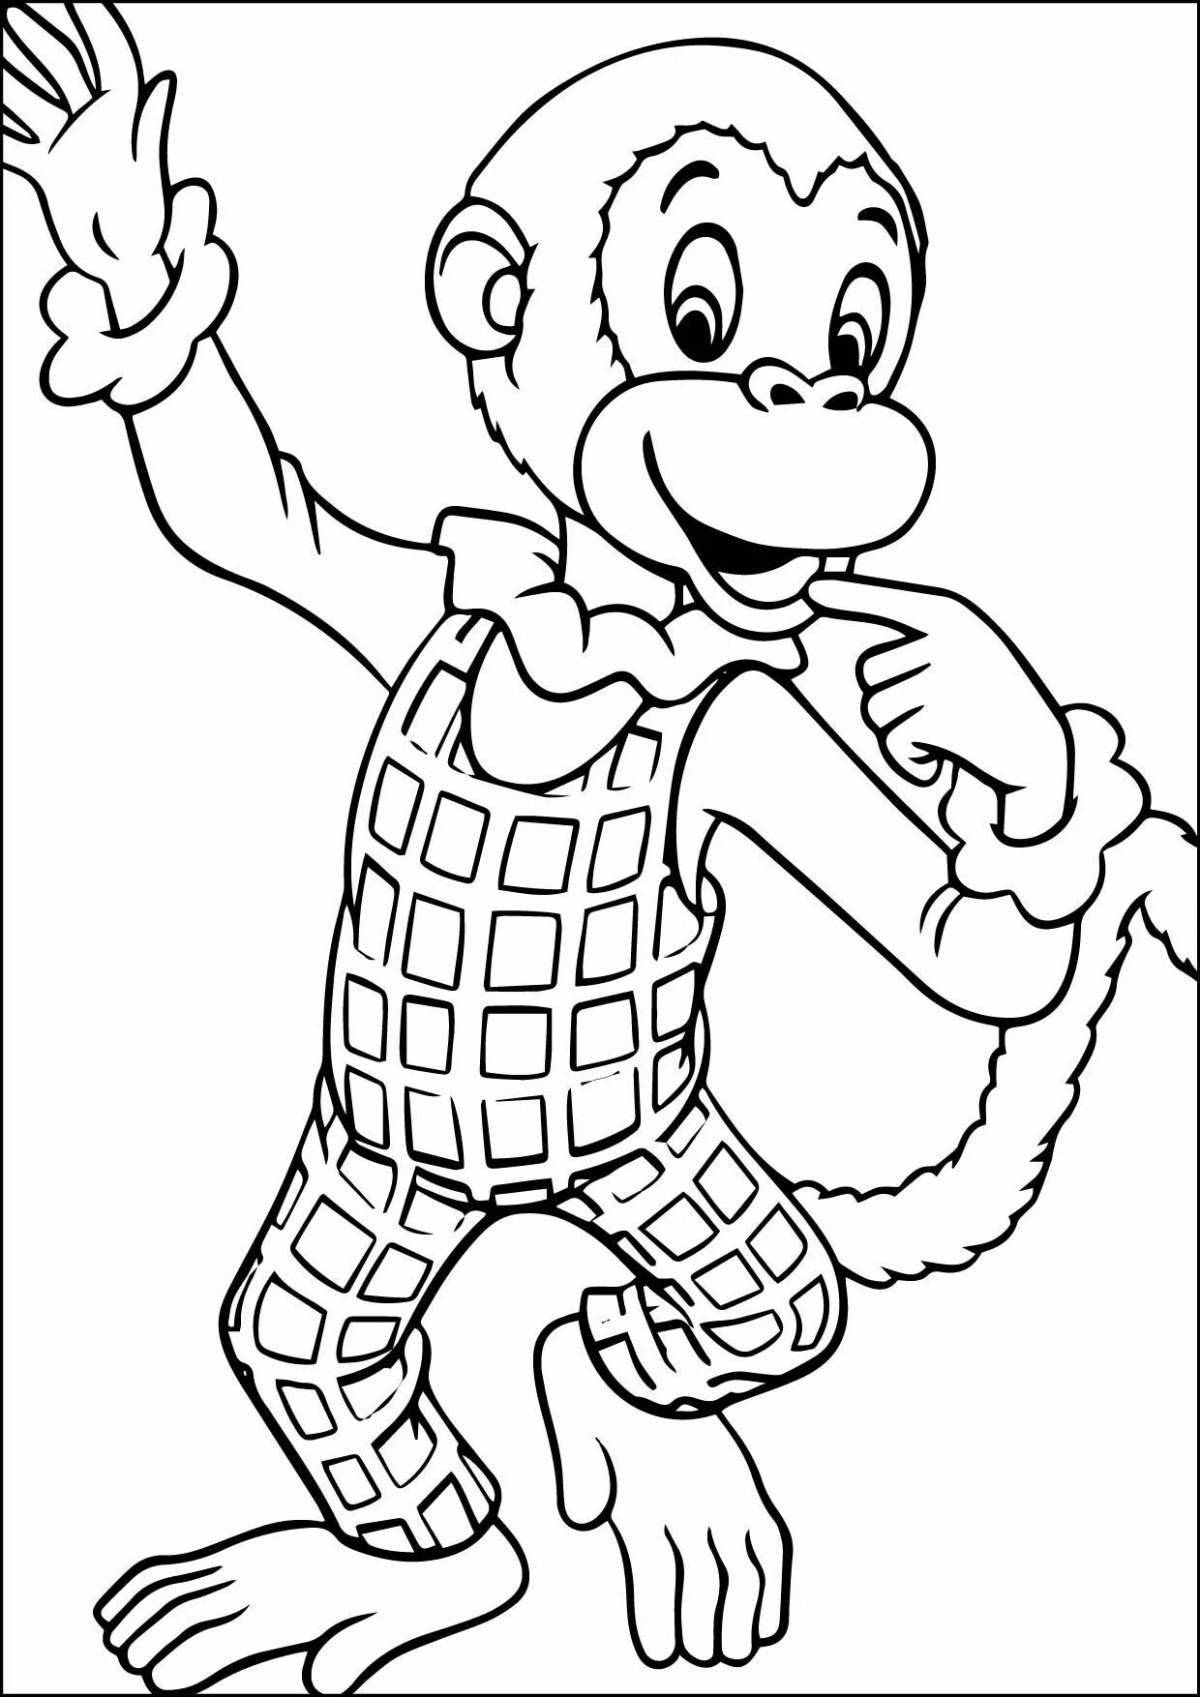 Zitkov's amazing monkey coloring page